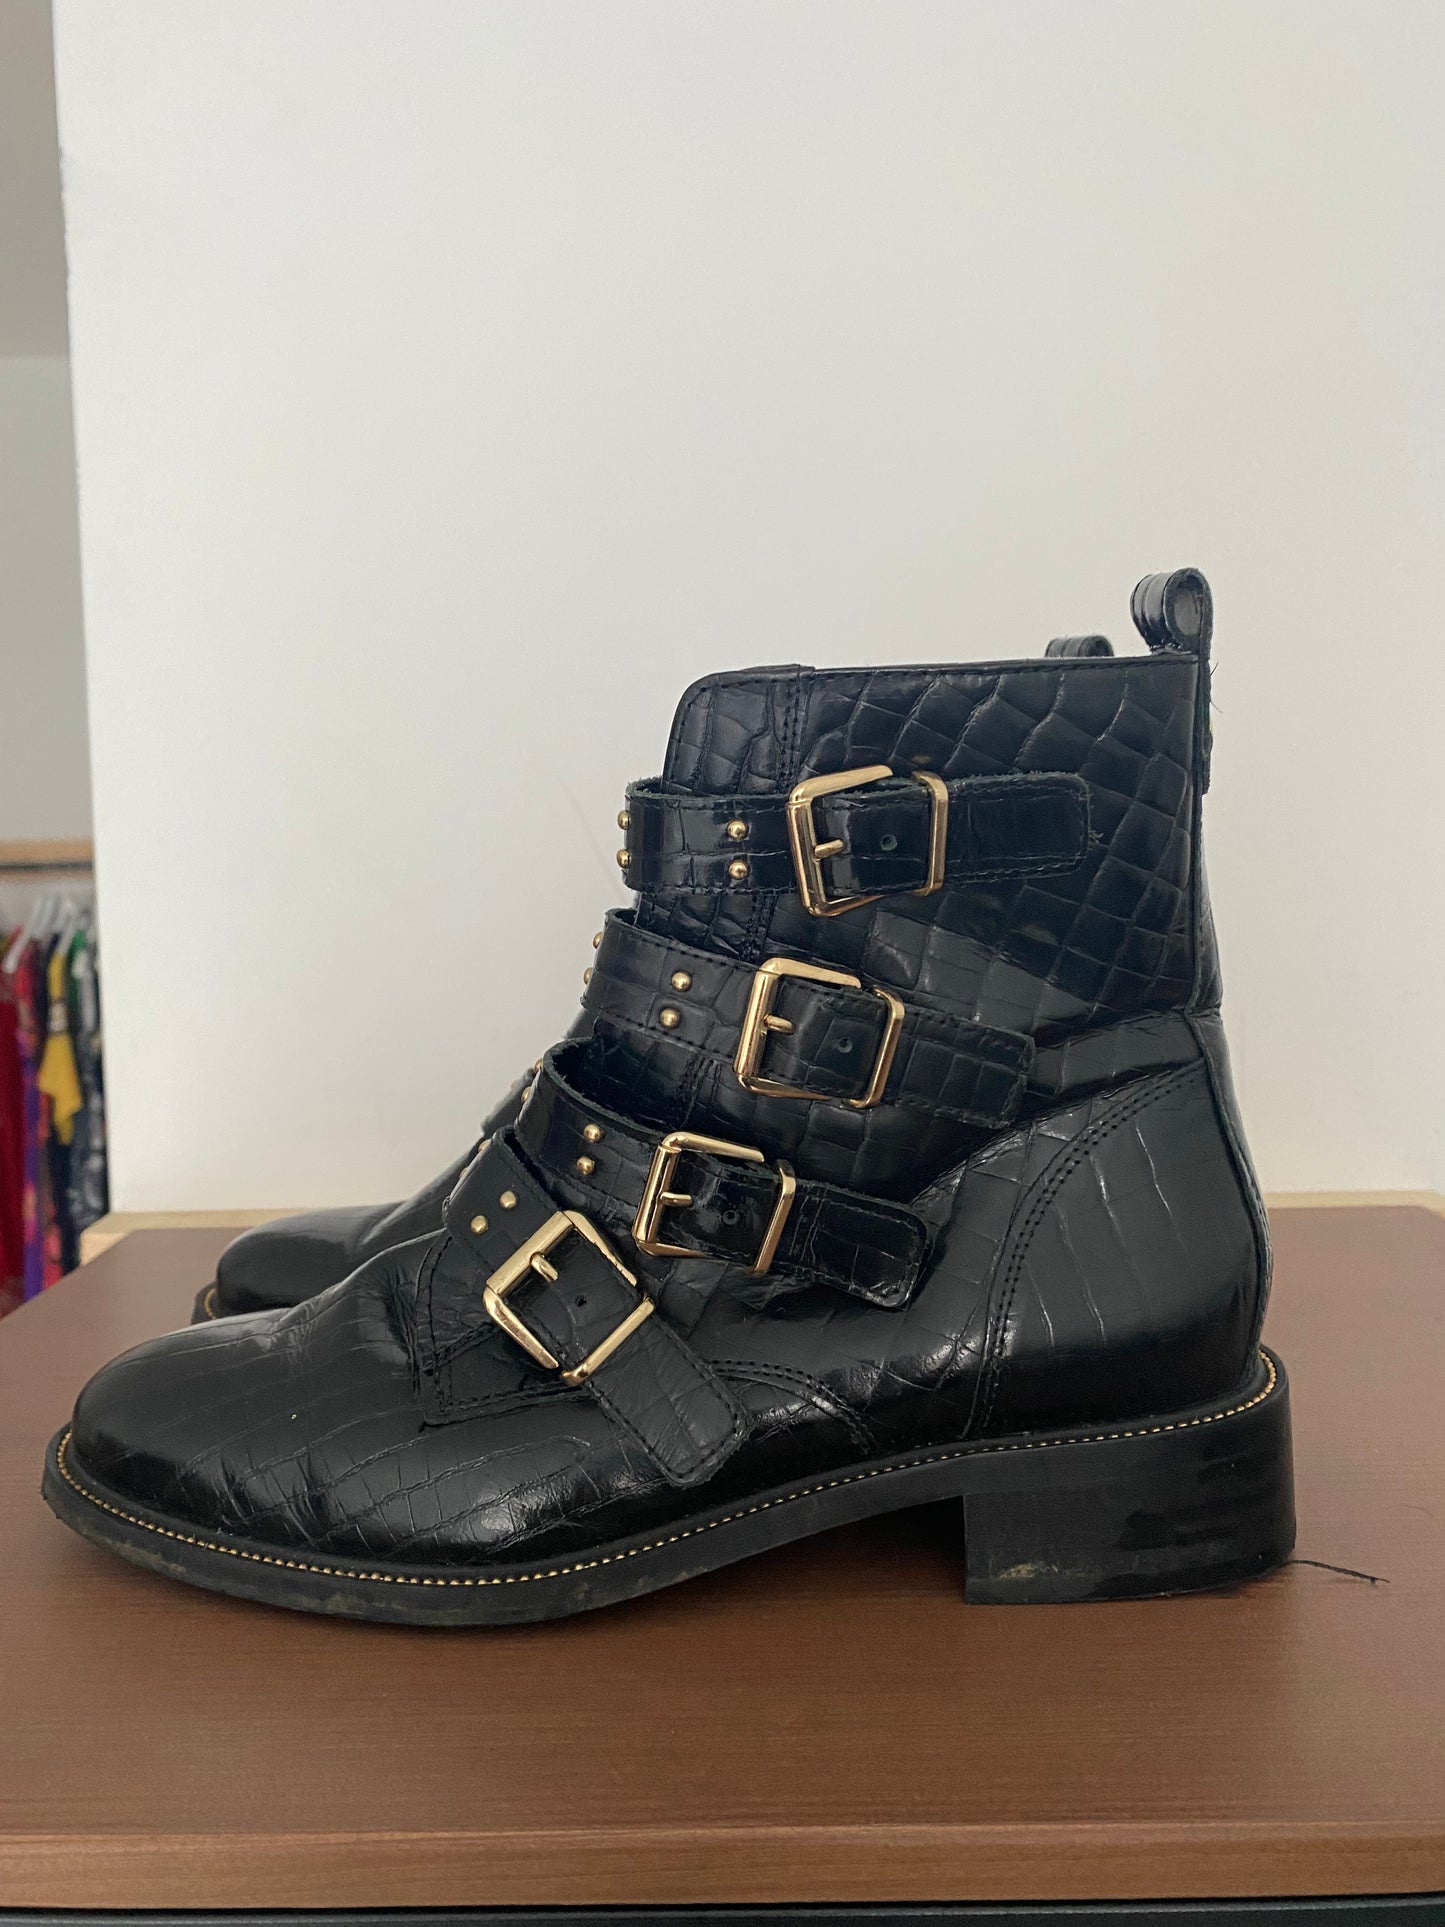 Carvella Black Leather Buckle Ankle Boots Size 7